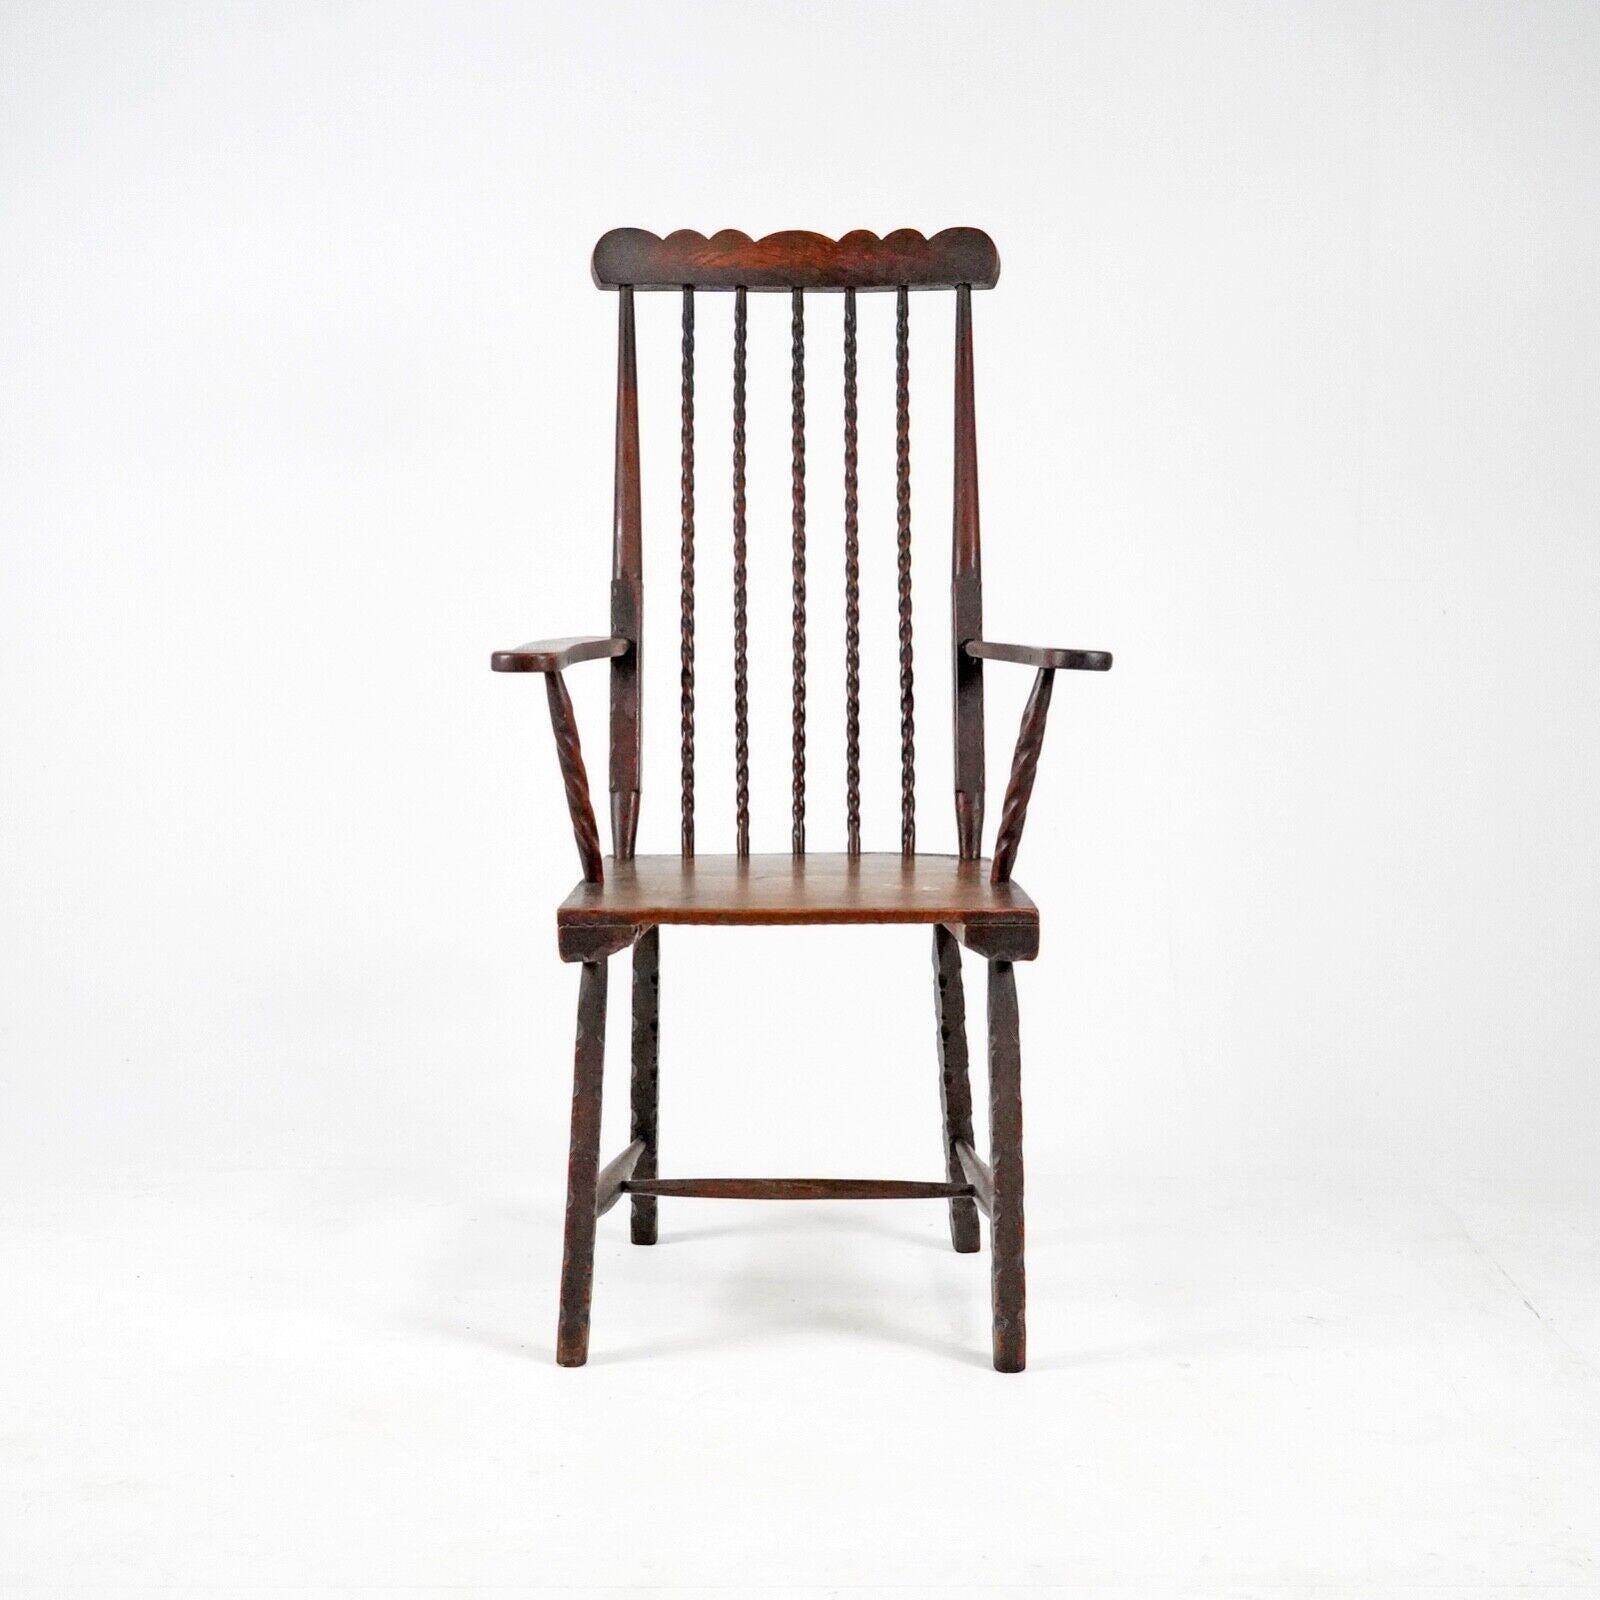 Early 19th century English elm folk art comb back Windsor chair. 
A unique and rare chair with tons of character. 
Barley twist spindles and extensively notched carved on the legs and seat.

Some signs of historic wood worm that has been treated.
